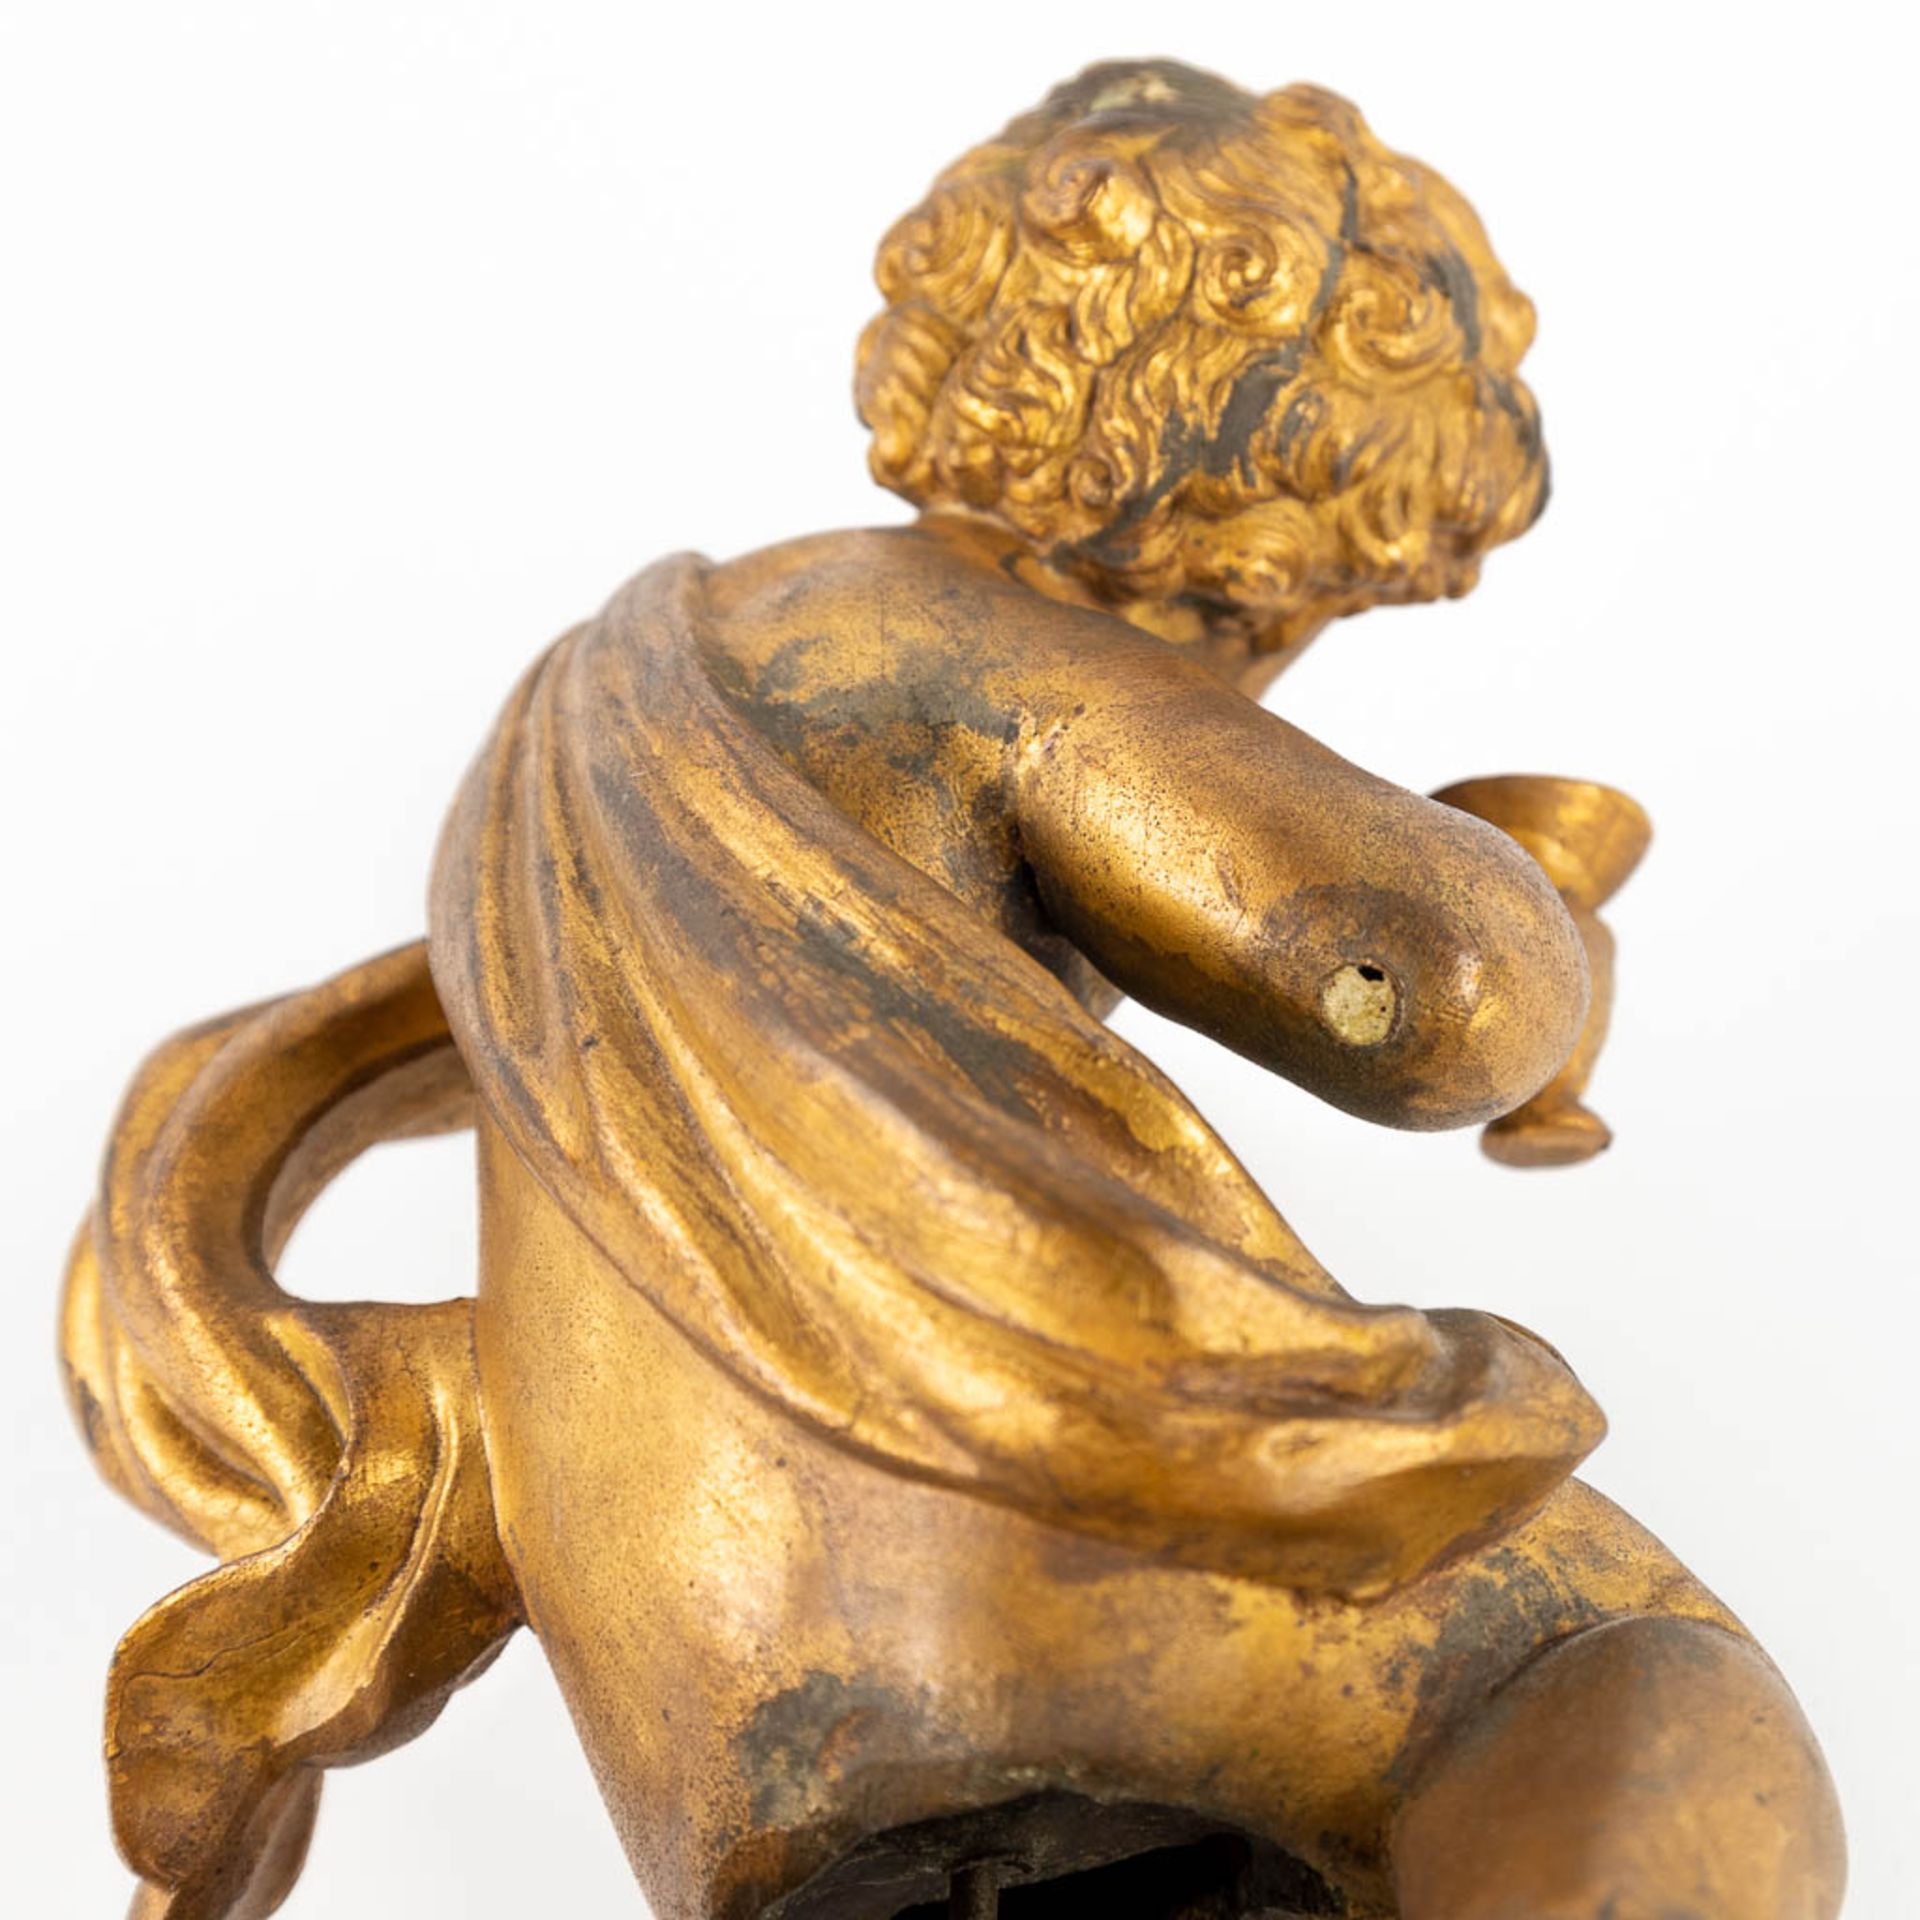 A pair of angels, gilt spelter and mounted on a wood base. 19th C. (W:12 x H:18 cm) - Image 10 of 14